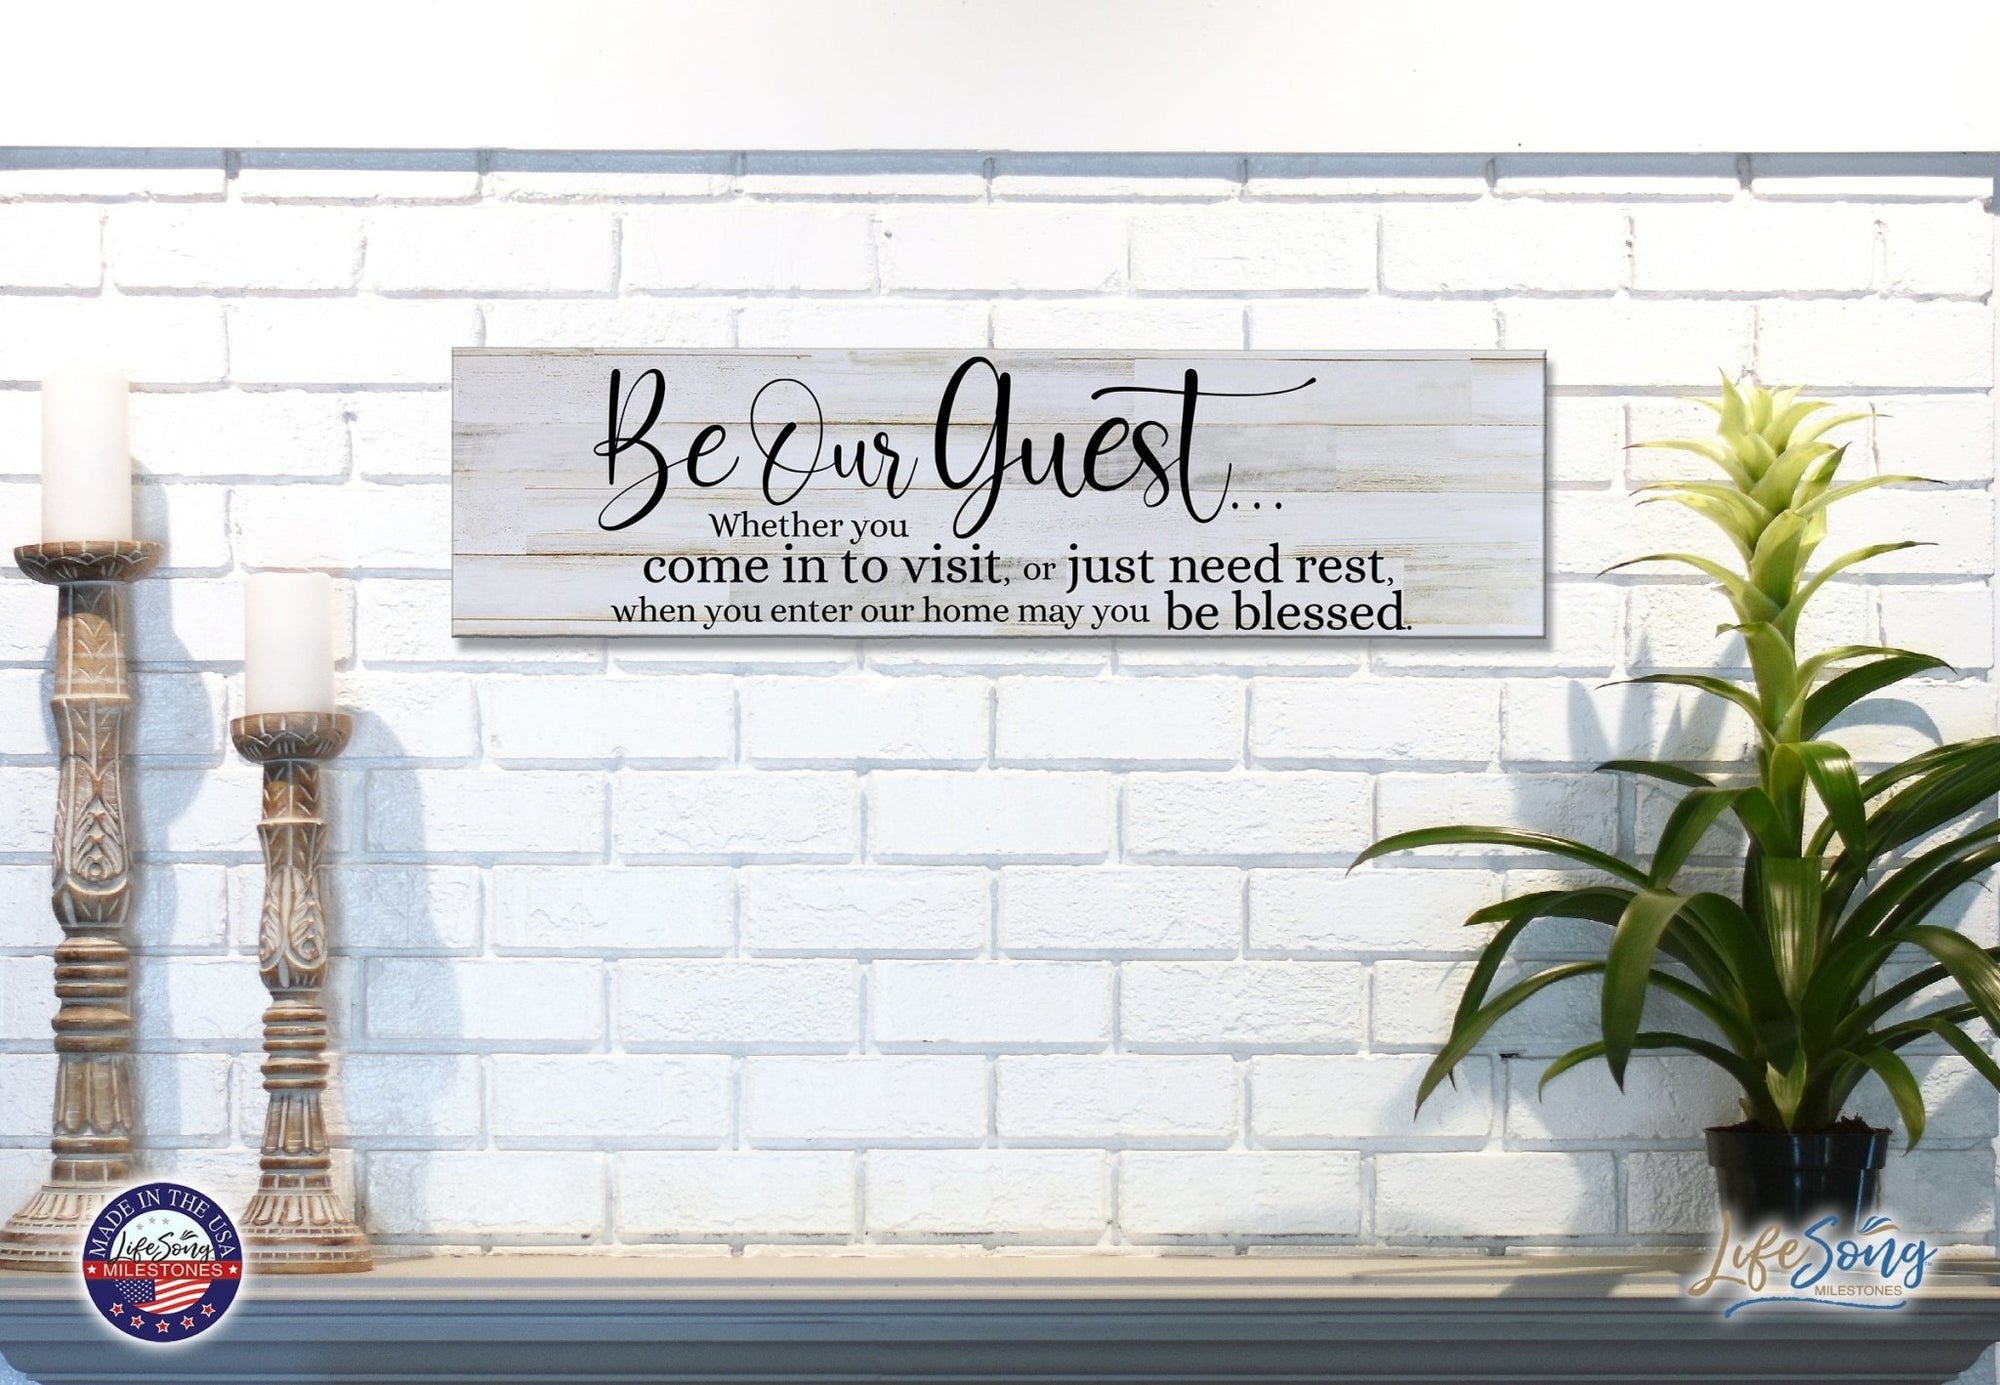 Inspirational Modern Wooden Wall Hanging Plaque 10x40 - Be Our Greatest - LifeSong Milestones